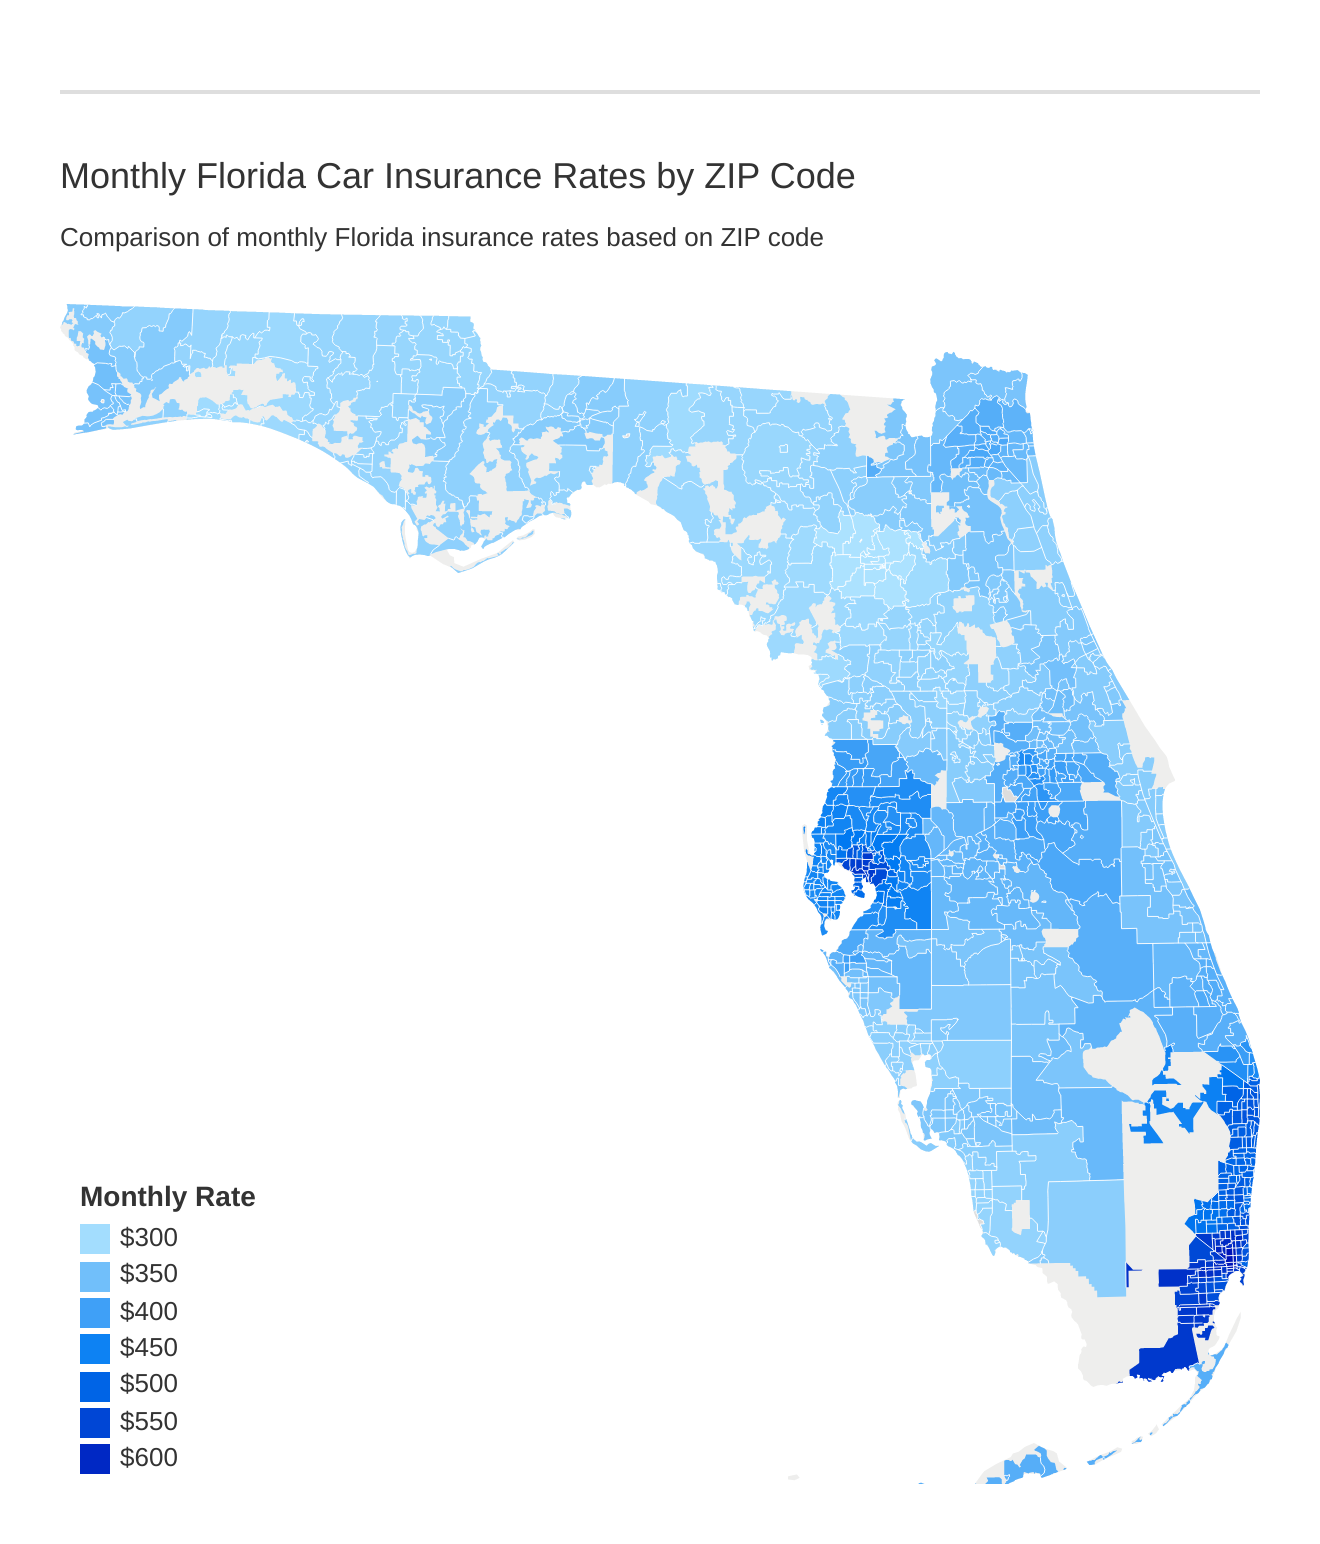 Monthly Florida Car Insurance Rates by ZIP Code